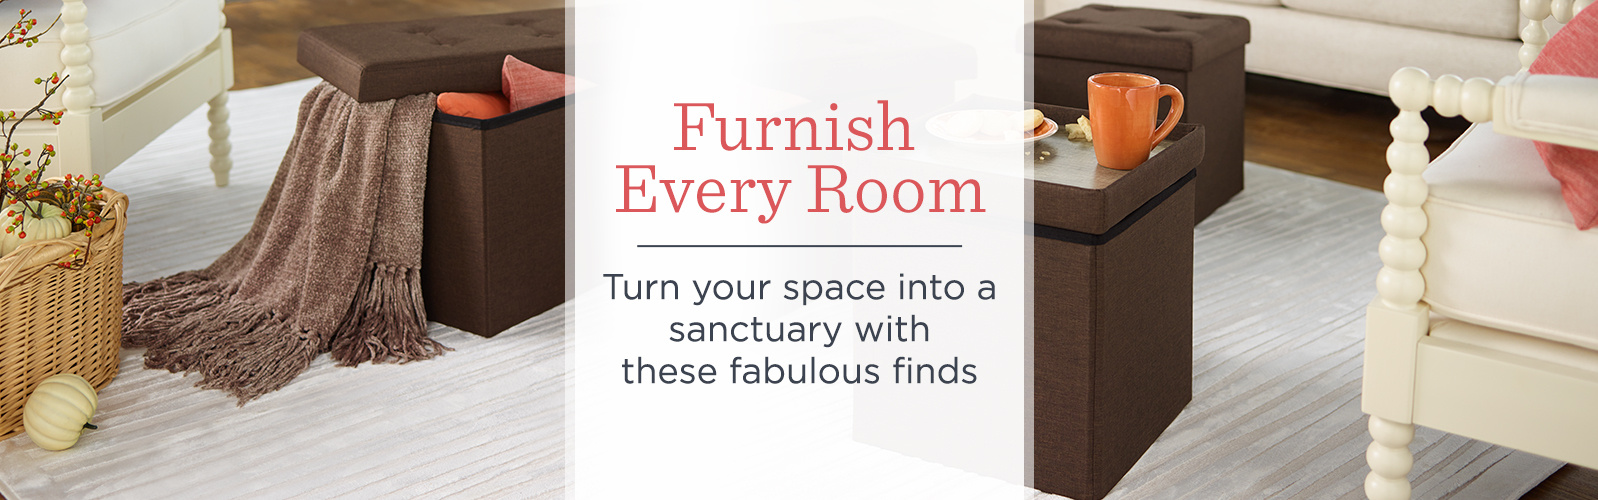 furniture kitchen living room office decor qvc furnituredepartment res essentials storage accent table furnish every turn your space into sanctuary with these fabulous finds